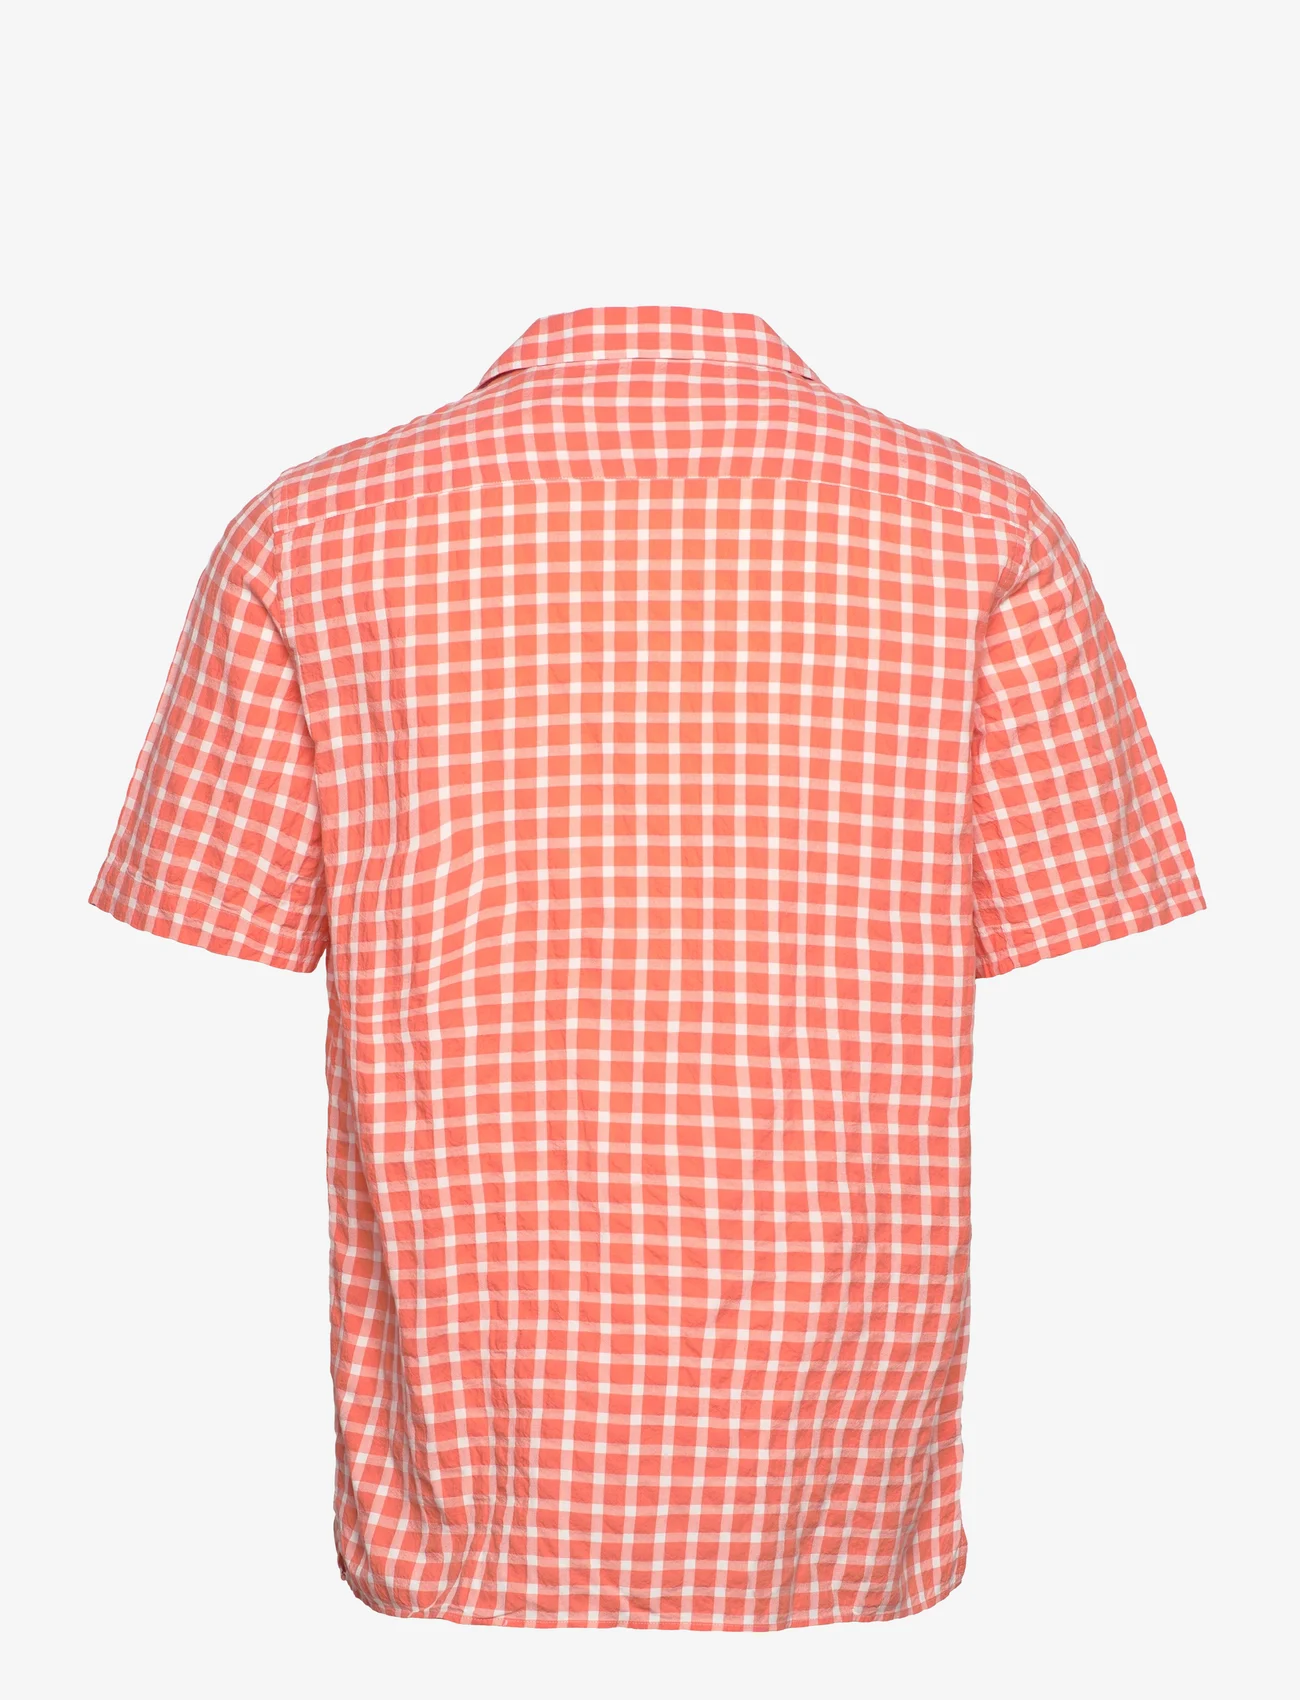 Armor Lux - Checked short-sleeved shirt - rutede skjorter - carreaux coral - 1